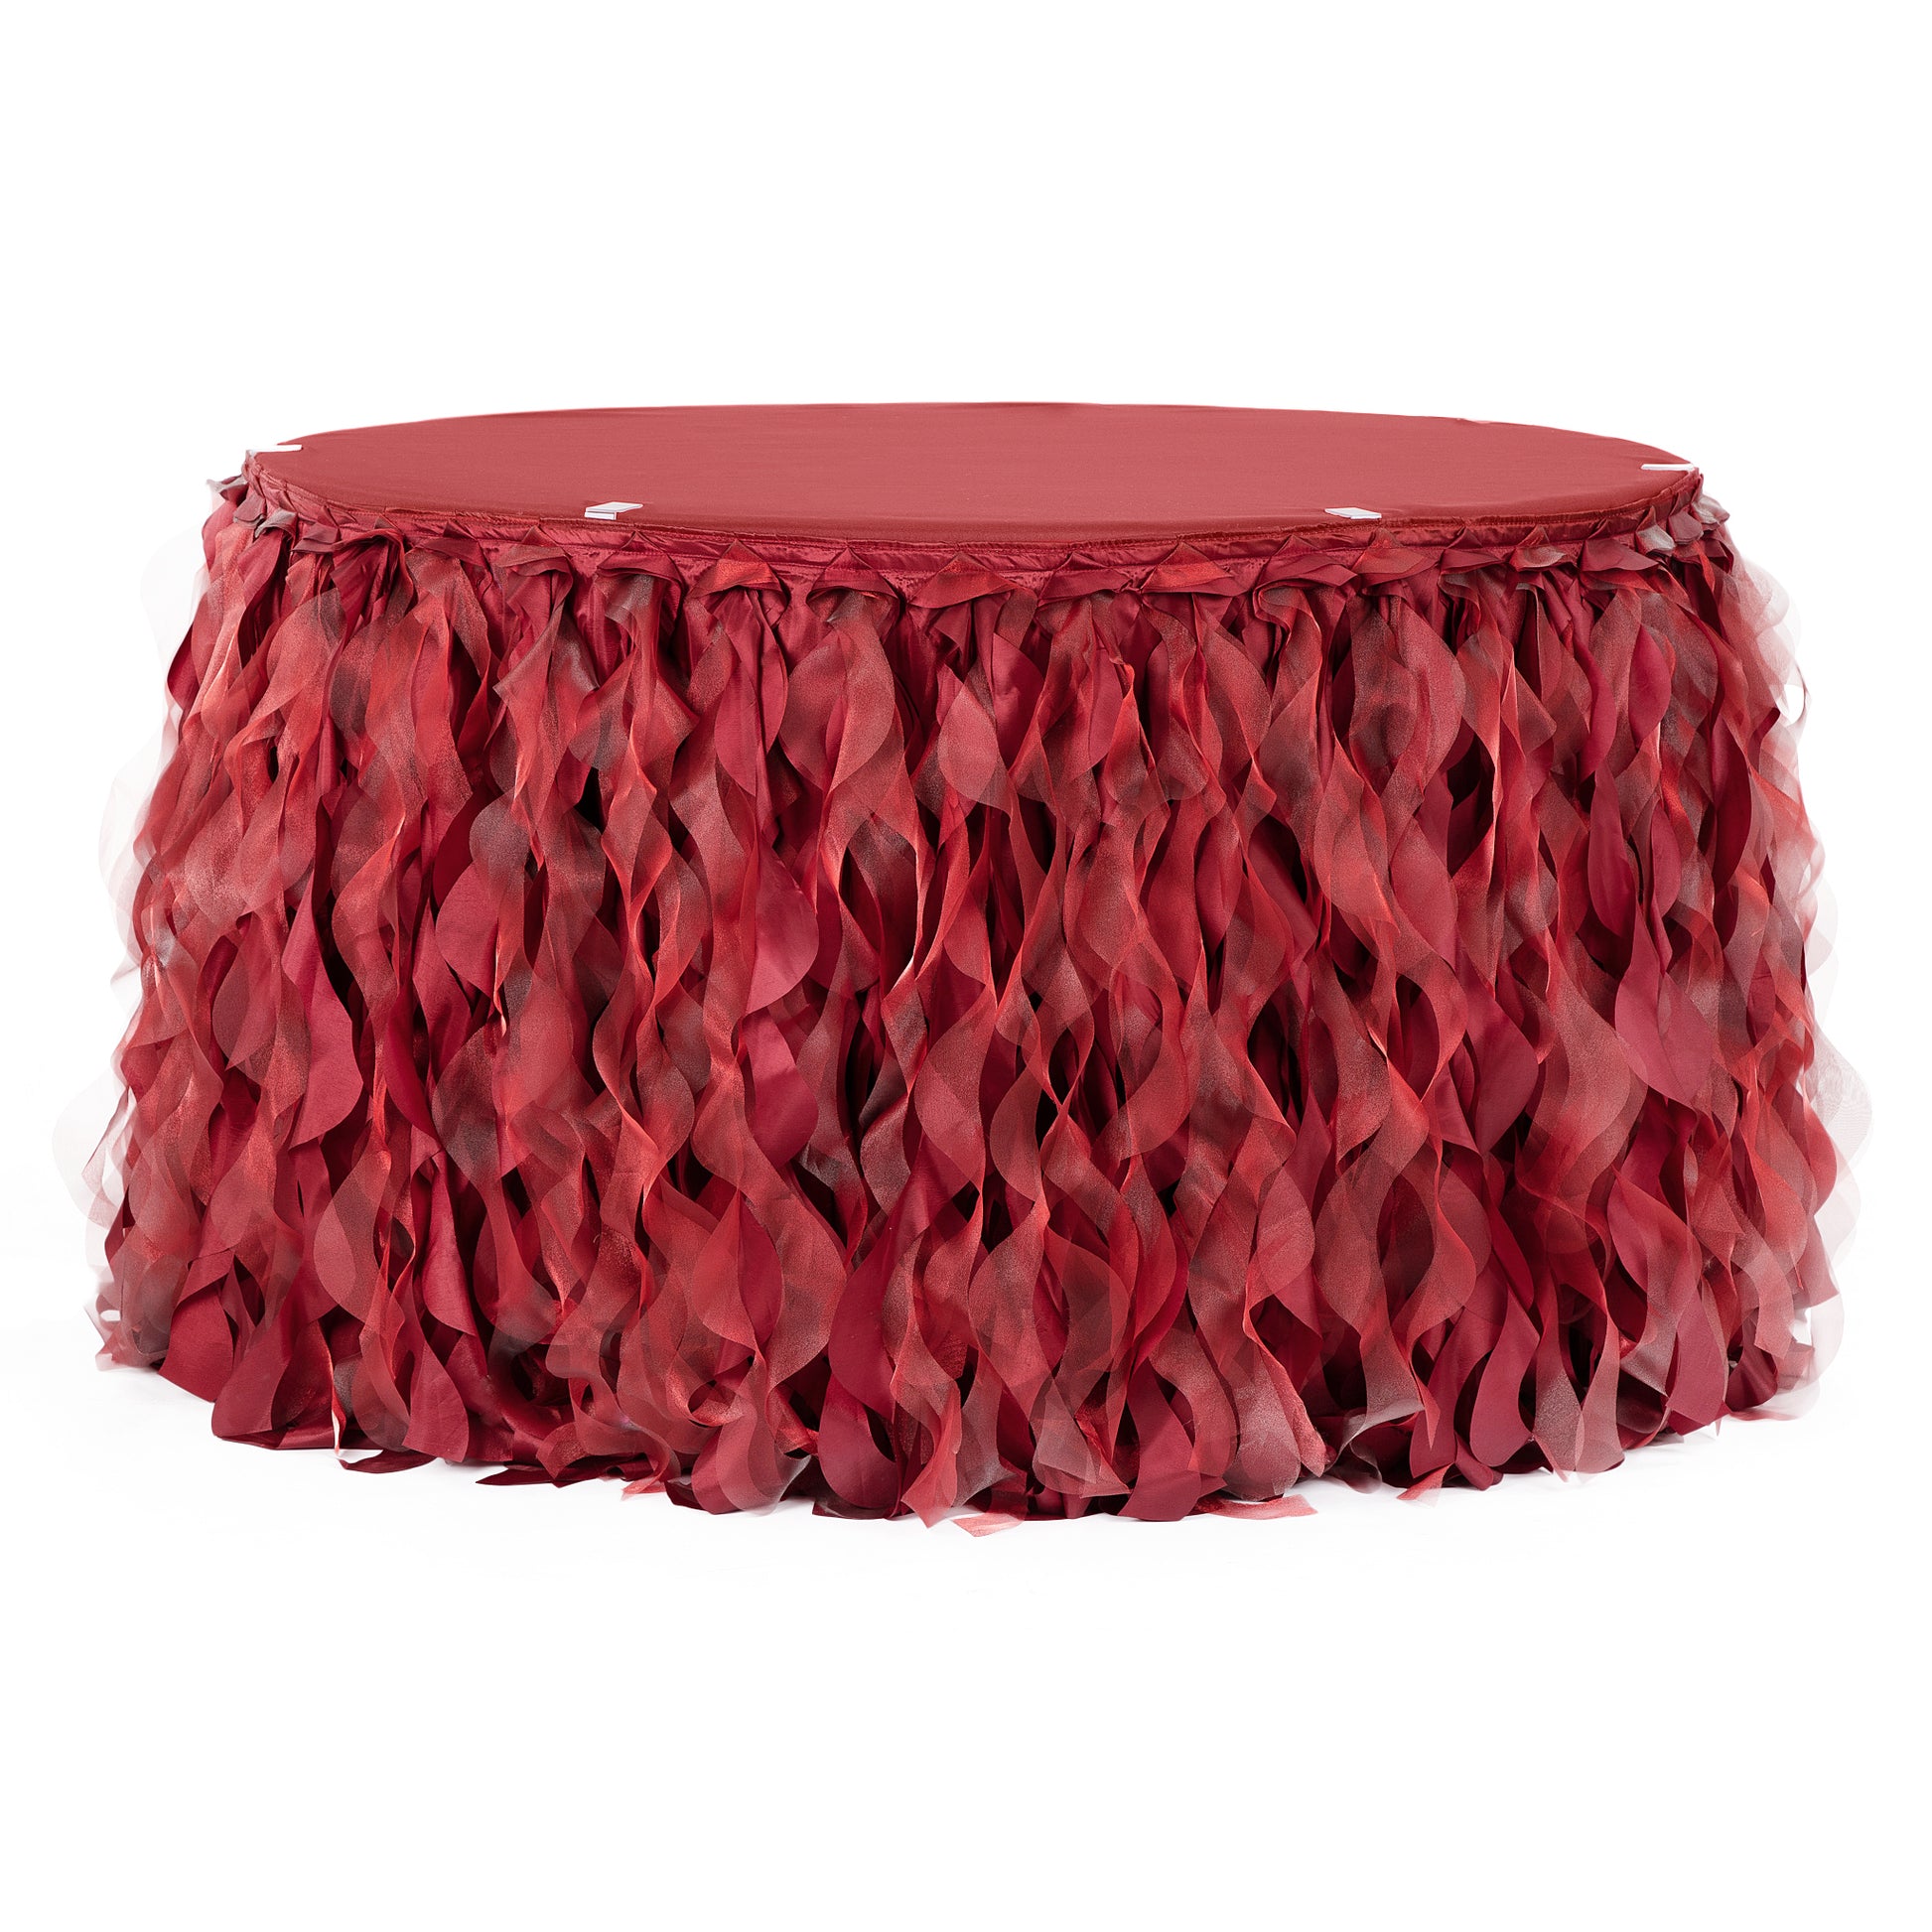 Curly Willow 14ft Table Skirt - Apple Red - CV Linens